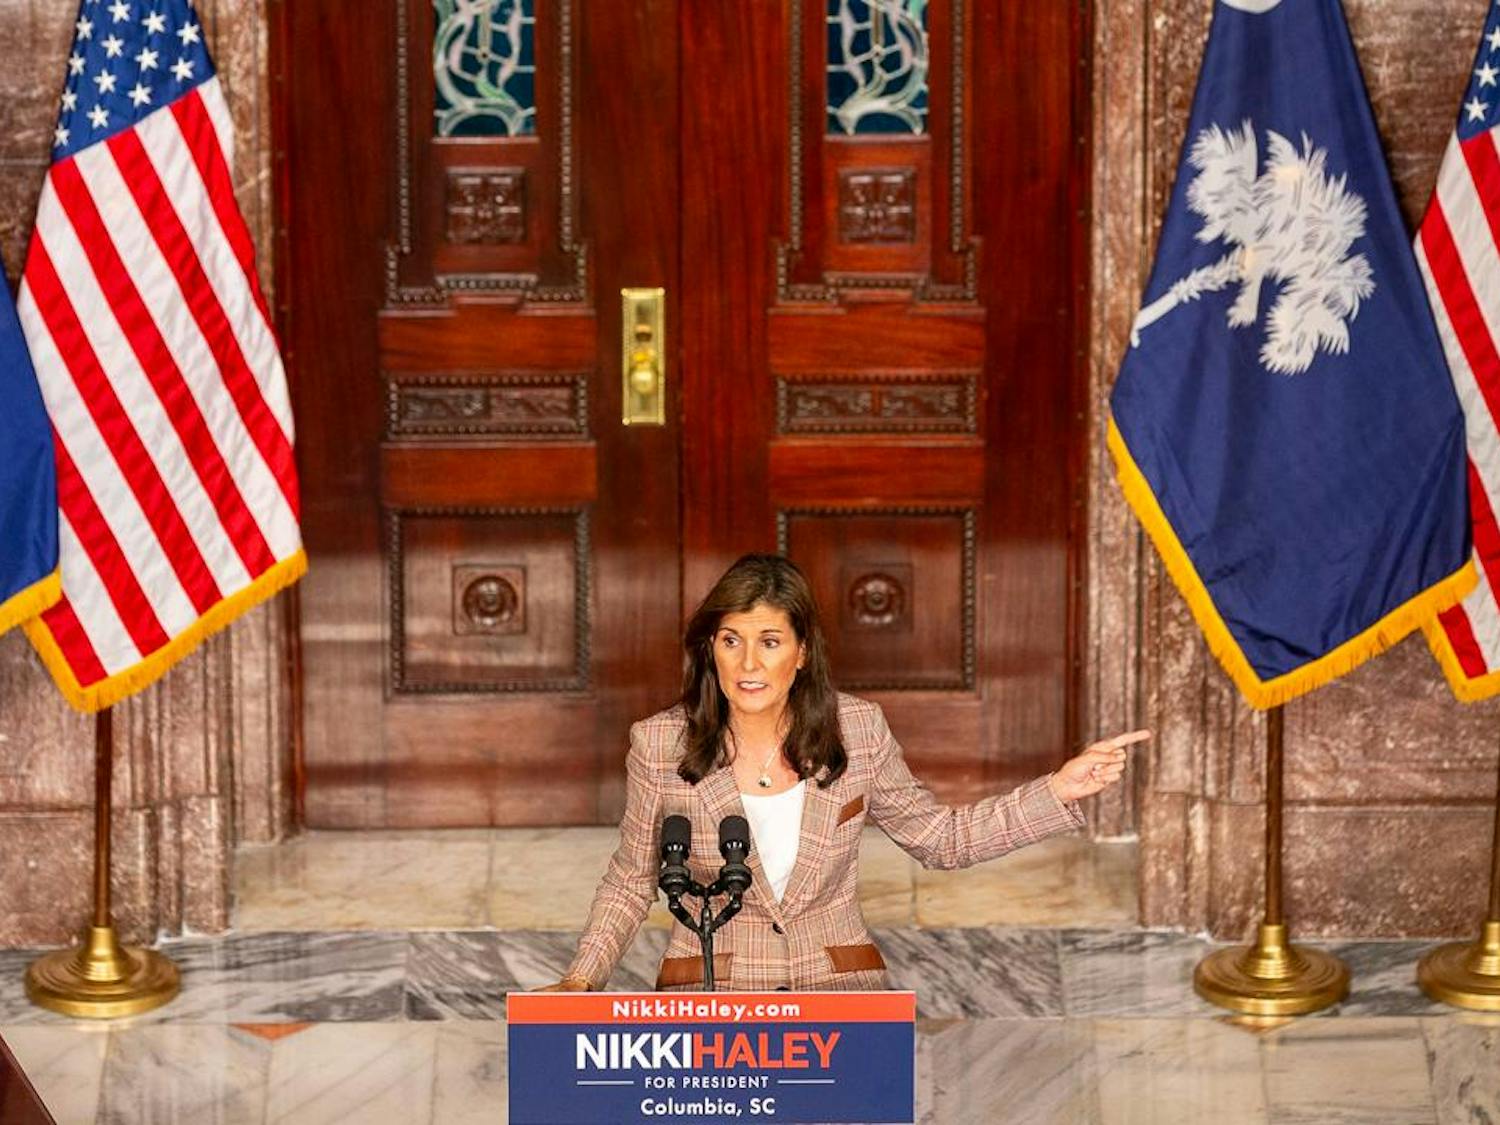 Nikki Haley gives a speech prior to signing her name onto the Republican presidential primary ballot in the lobby of the South Carolina Statehouse on Oct. 30, 2023. The former governor of South Carolina talked about economics, homeland security, foreign affairs, education and more during the event.